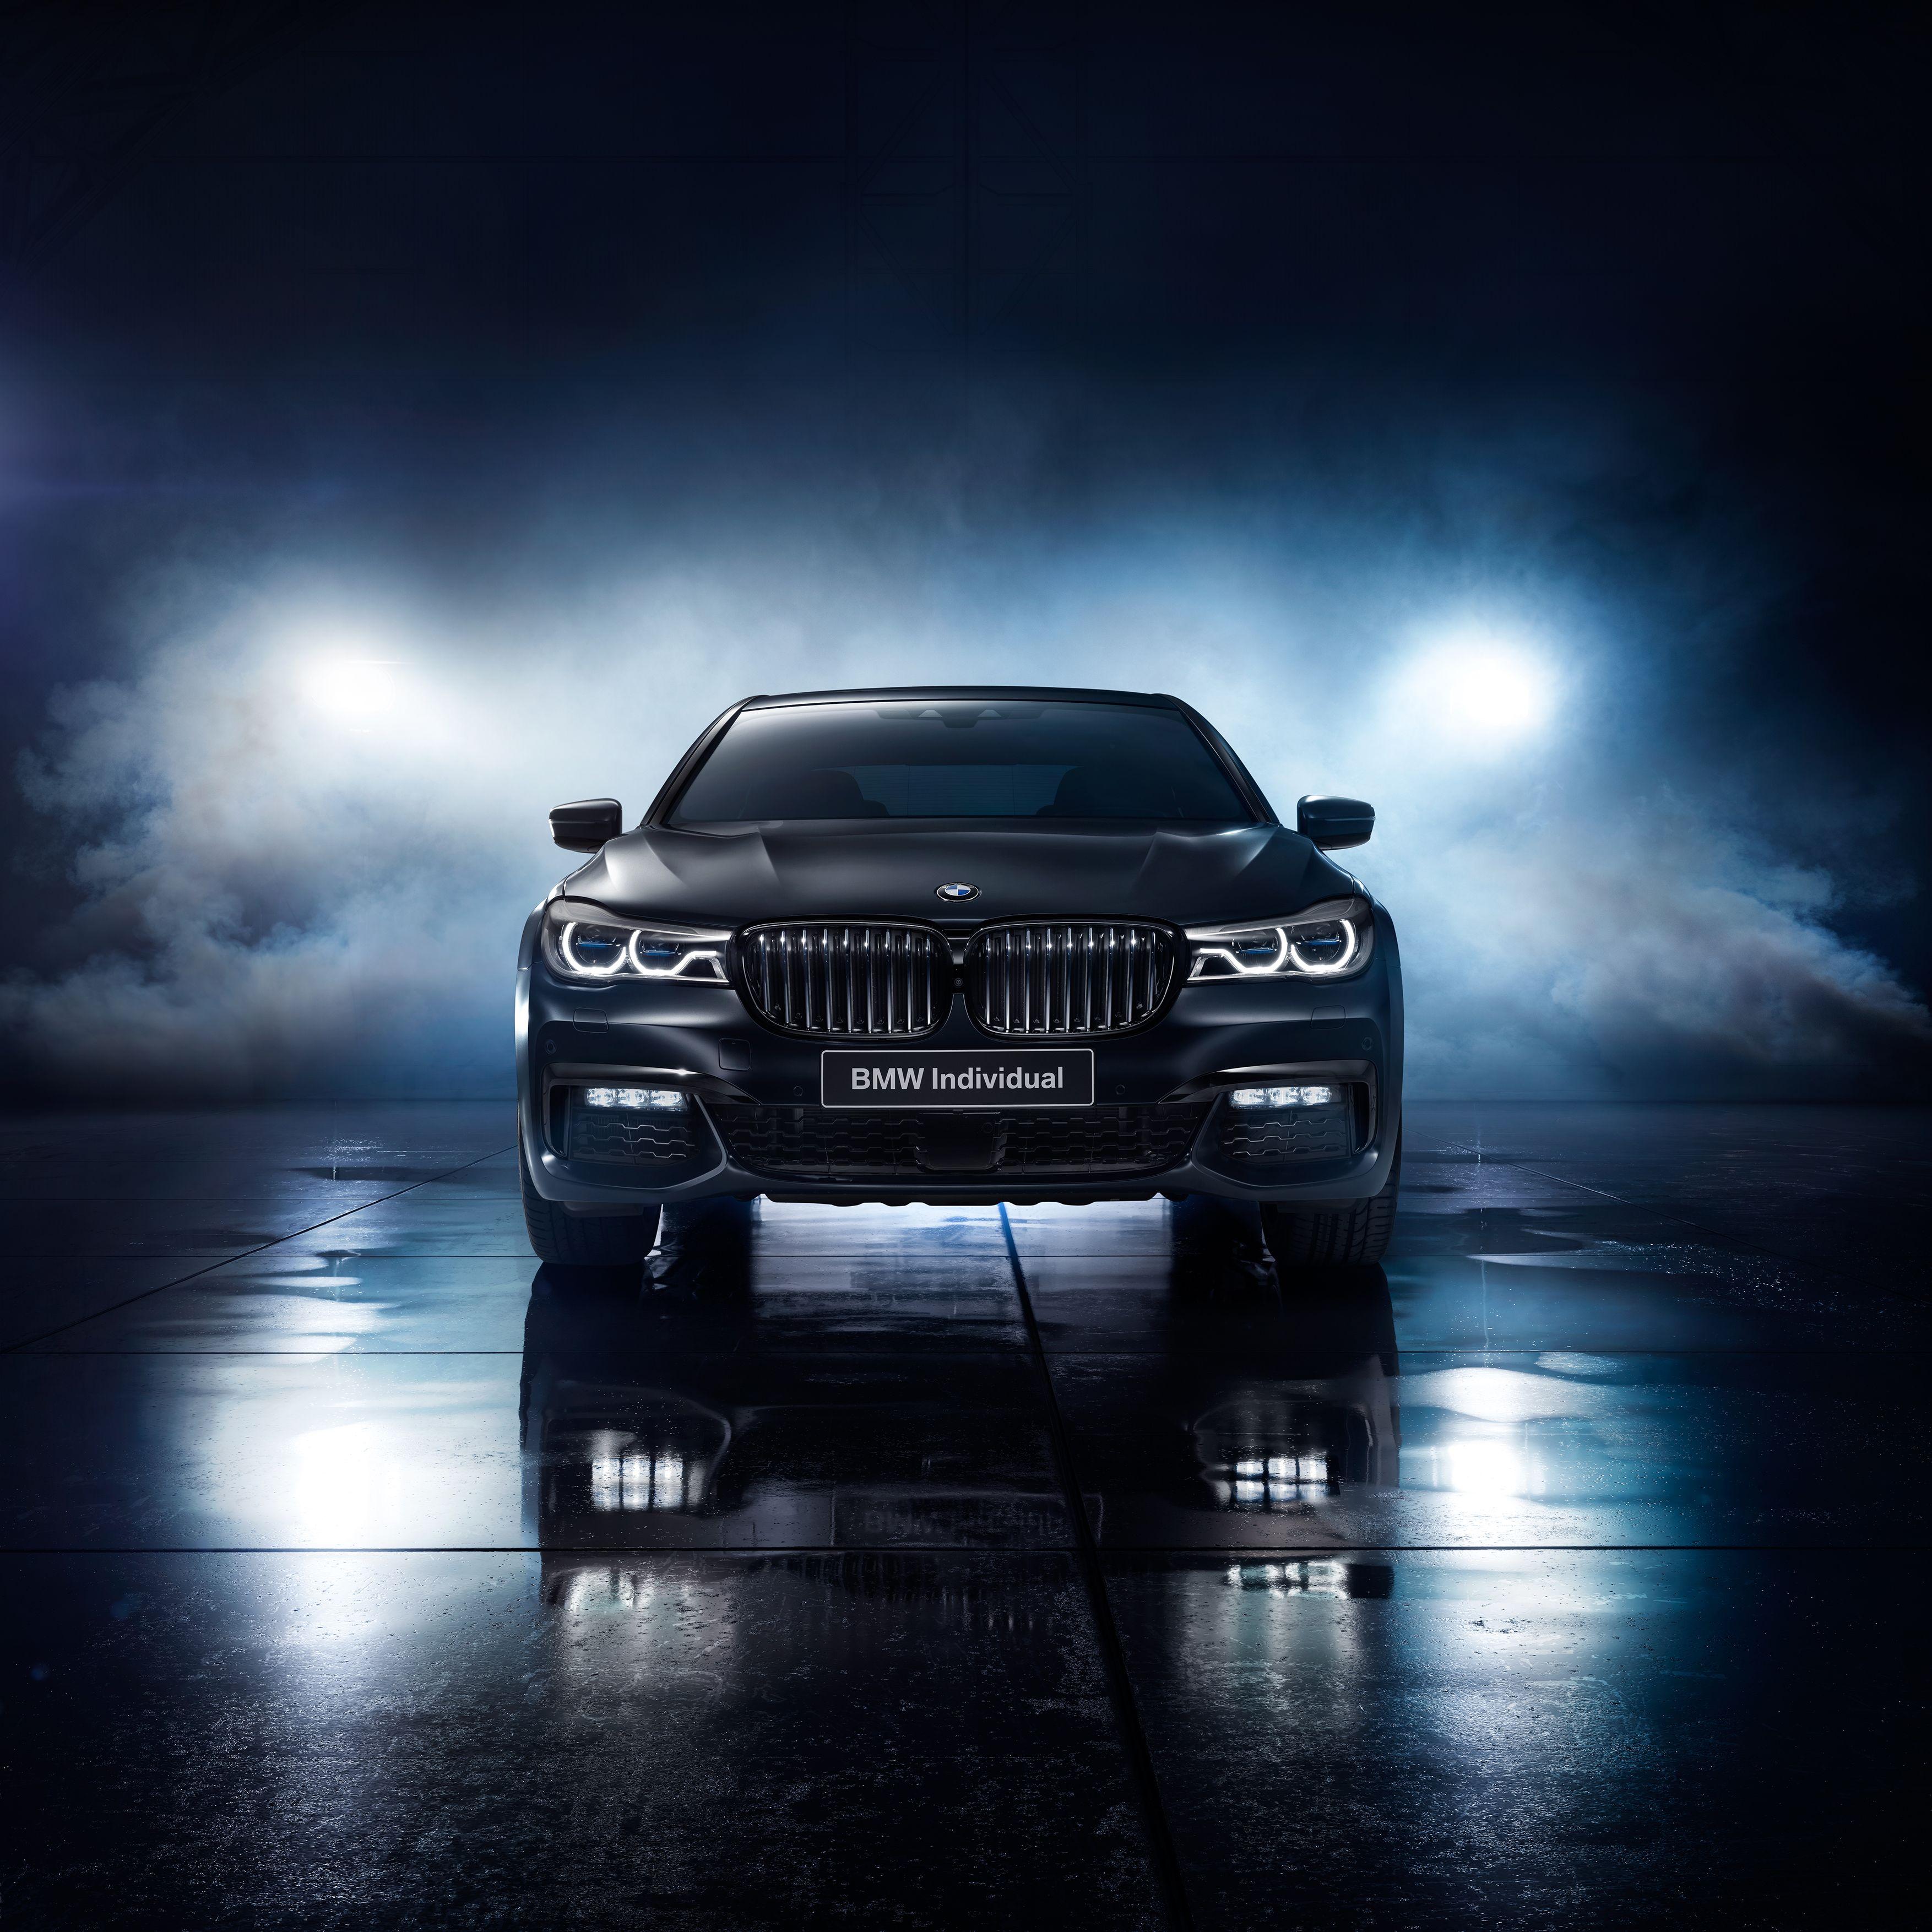 Bmw 7 Wallpapers